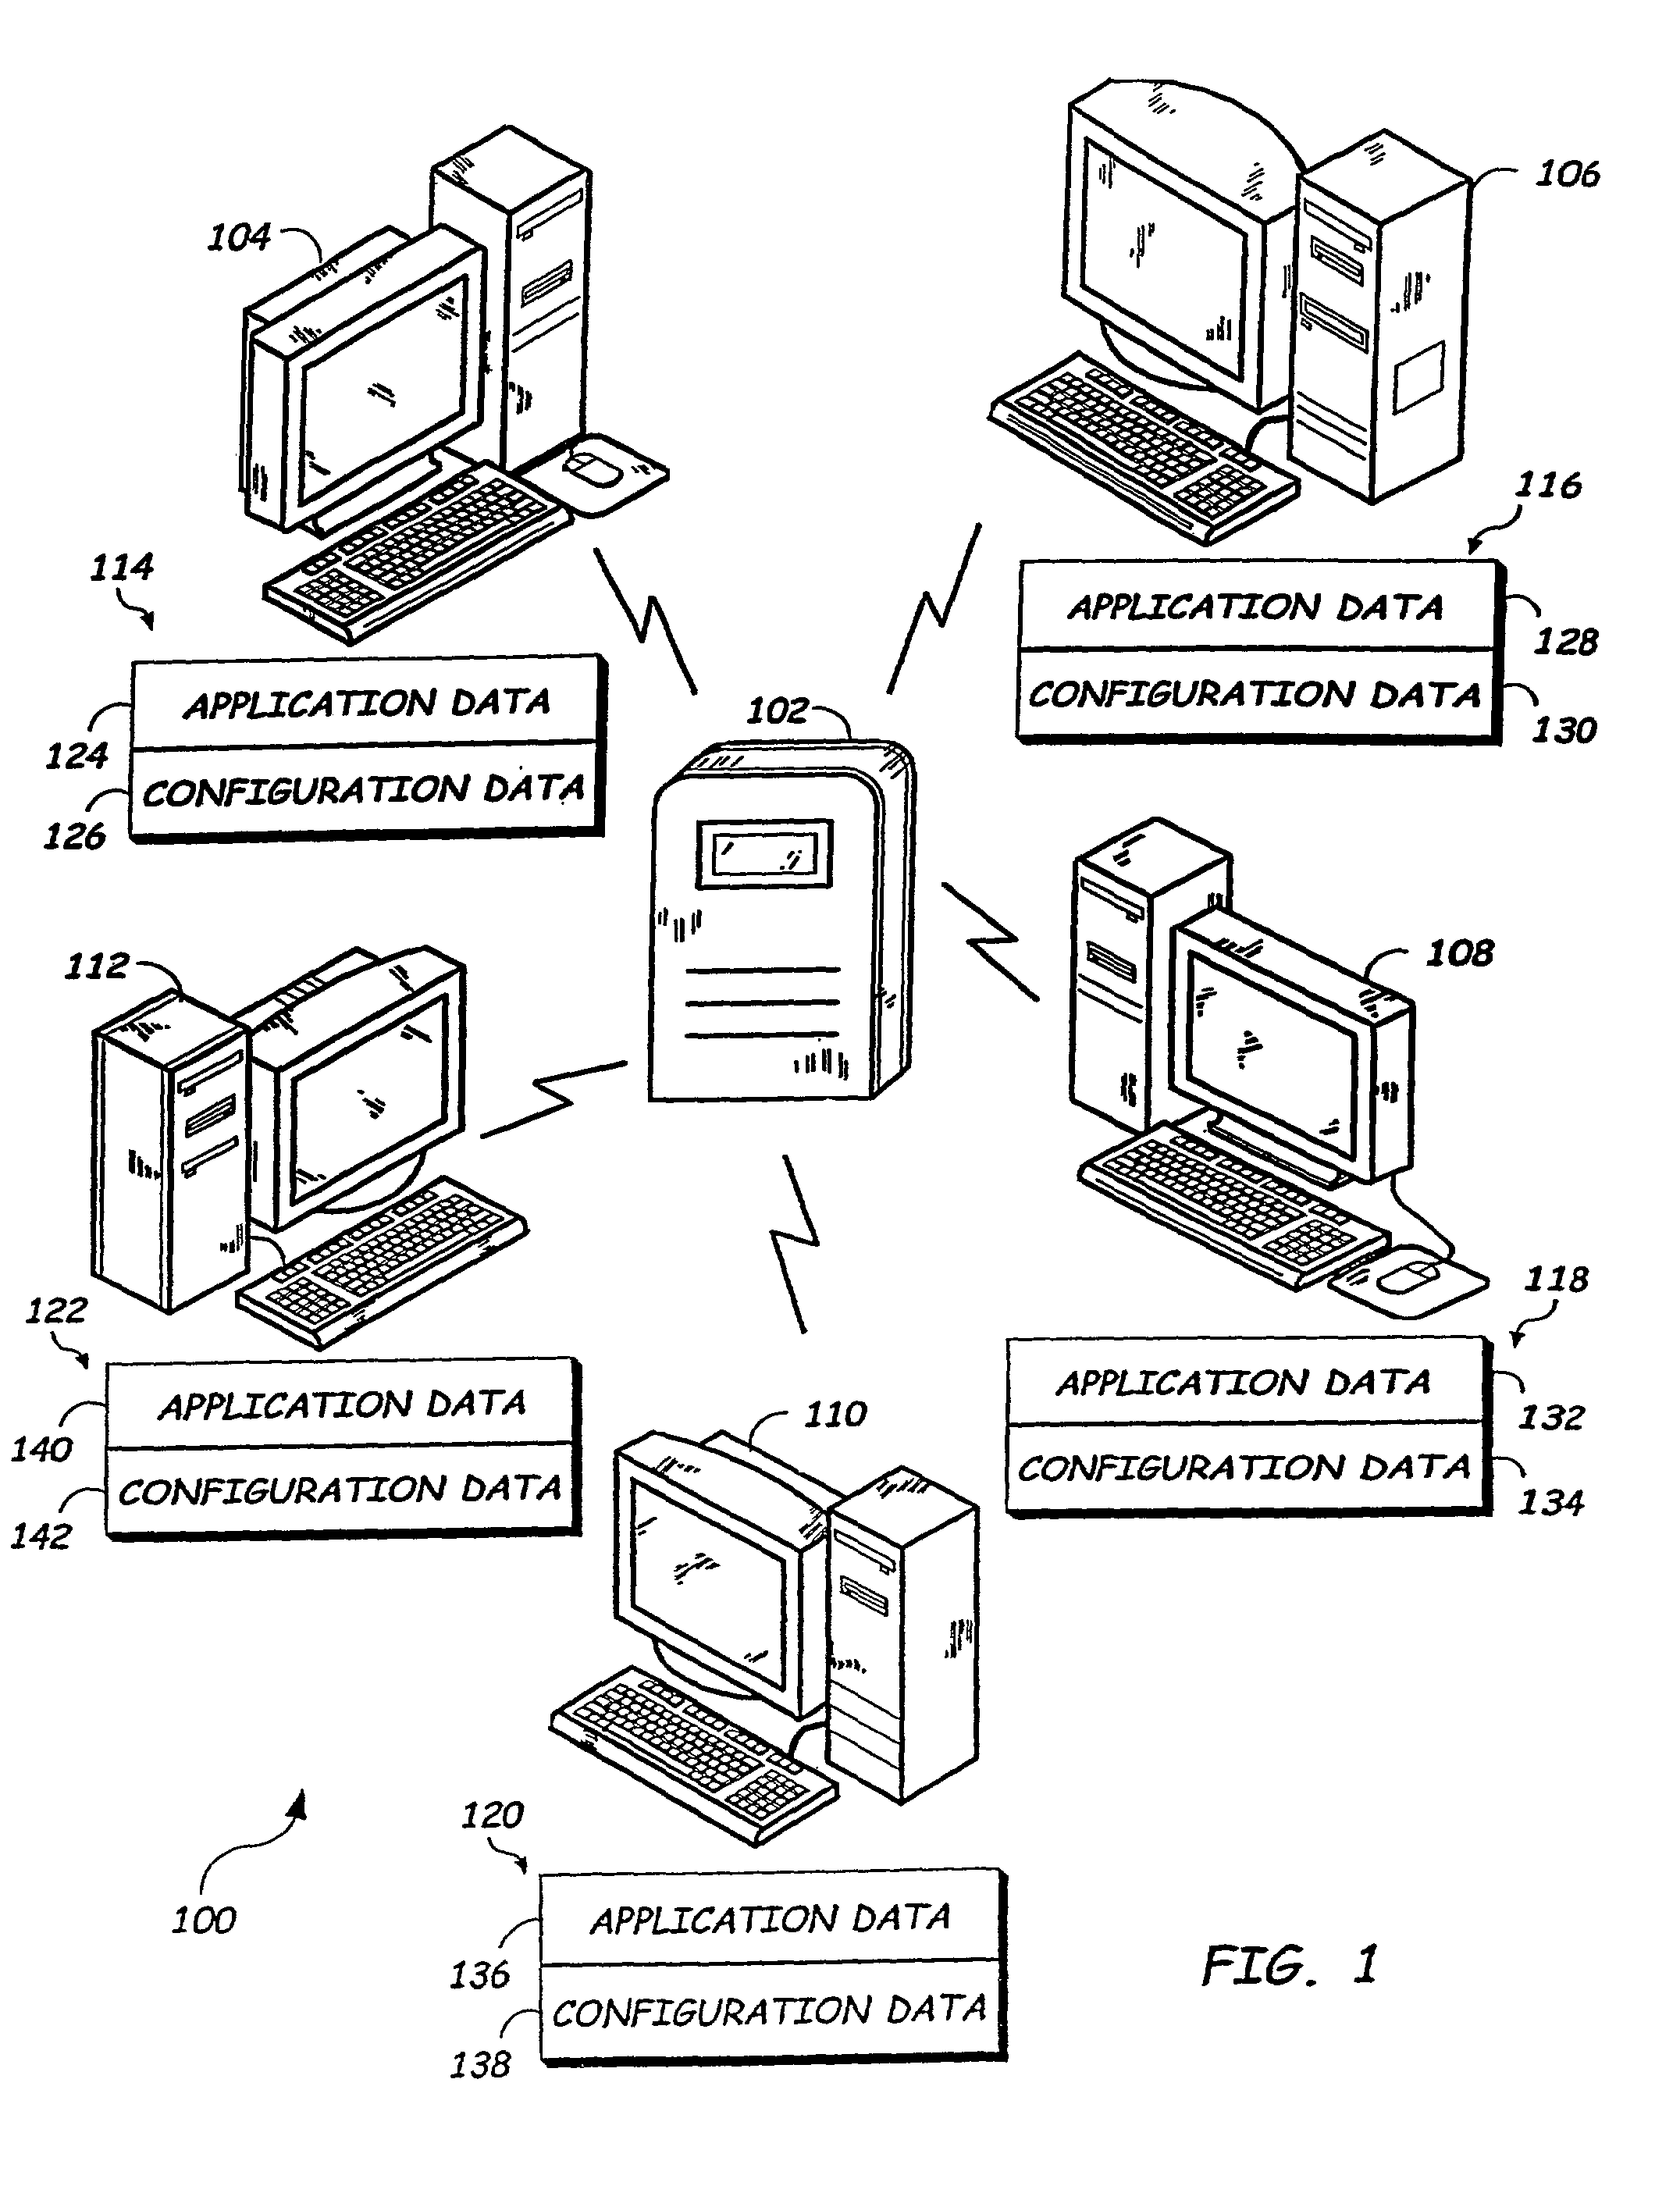 System for providing data backup and restore with updated version by creating data package based upon configuration data application data and user response to suggestion